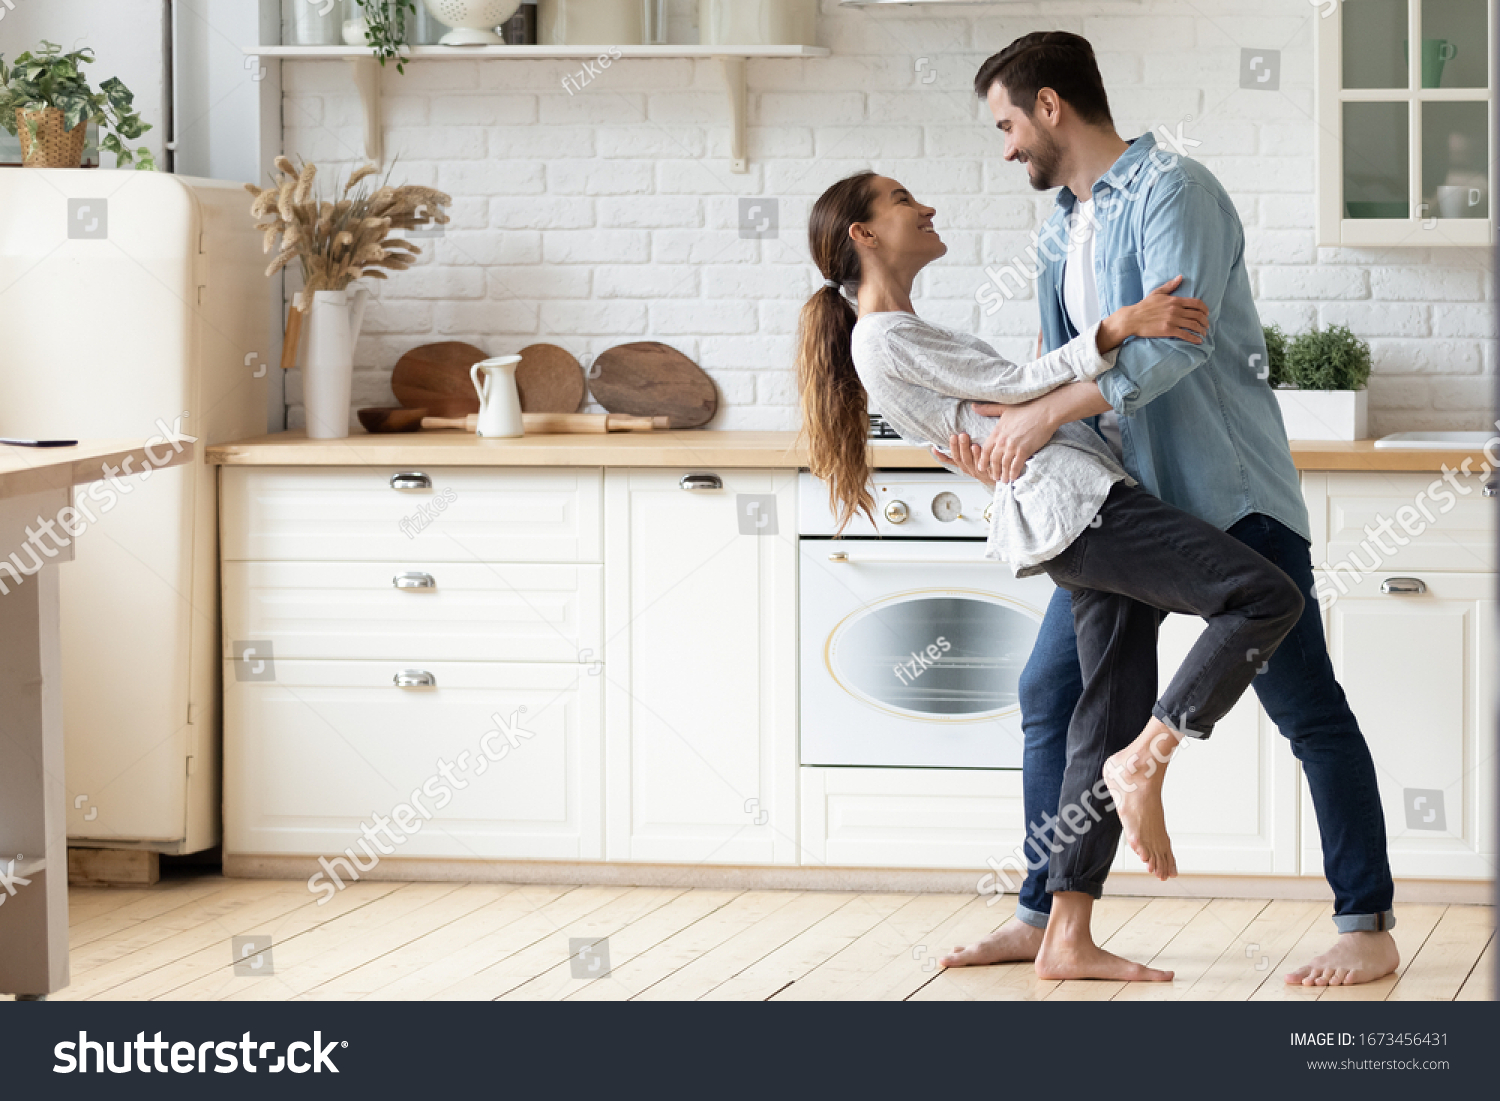 Happy loving young couple dancing romantic dance on date in modern kitchen, smiling husband and wife celebrating anniversary, enjoying tender moment, having fun, moving to music at home #1673456431